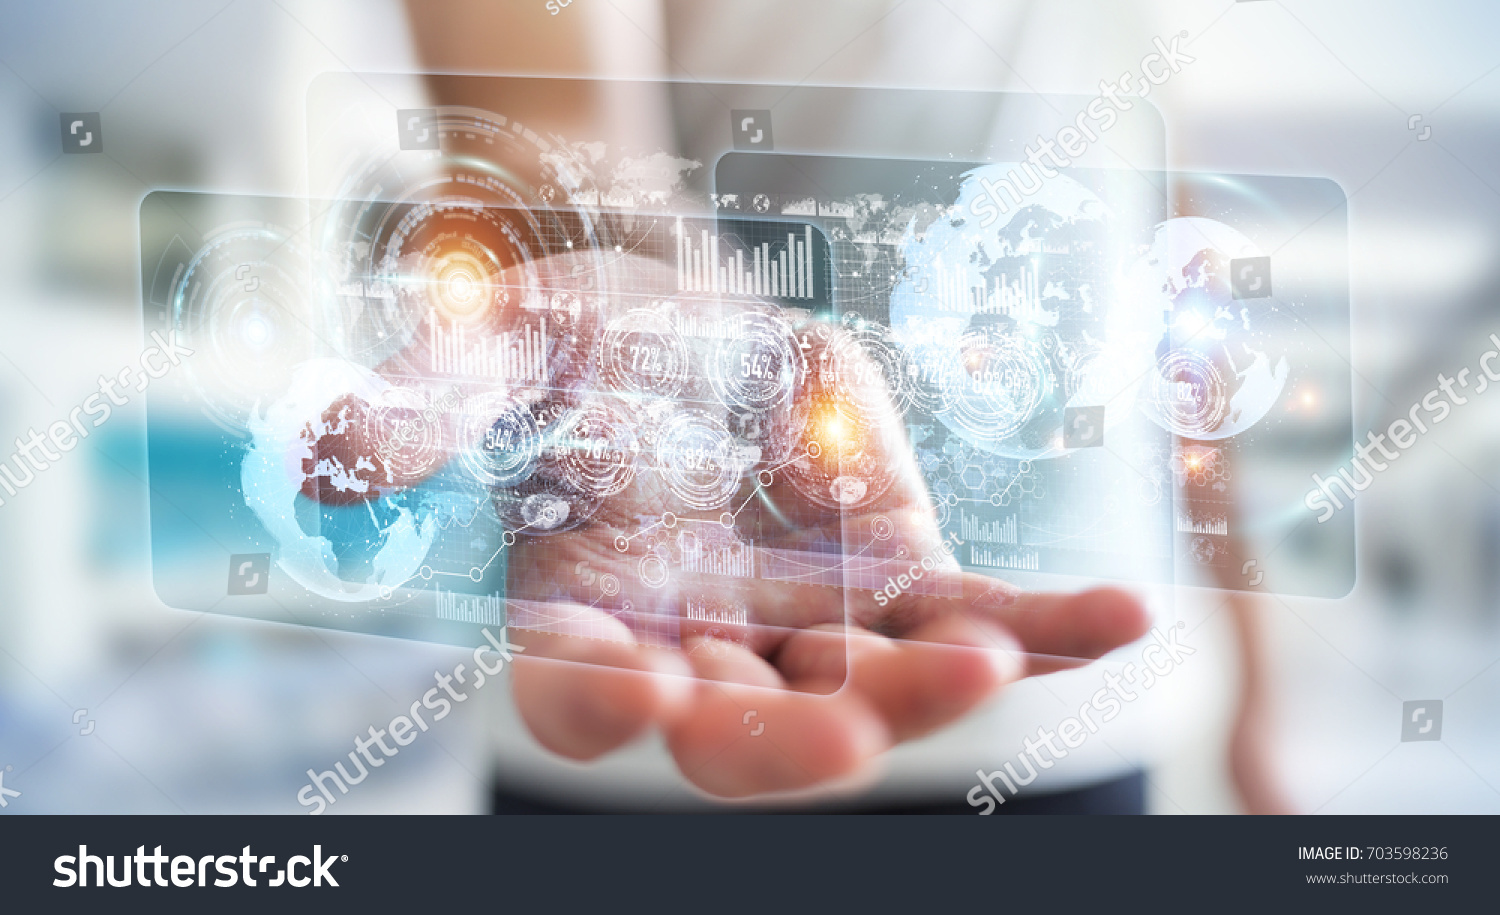 Hologram screen with digital datas used by businessman on blurred background 3D rendering #703598236